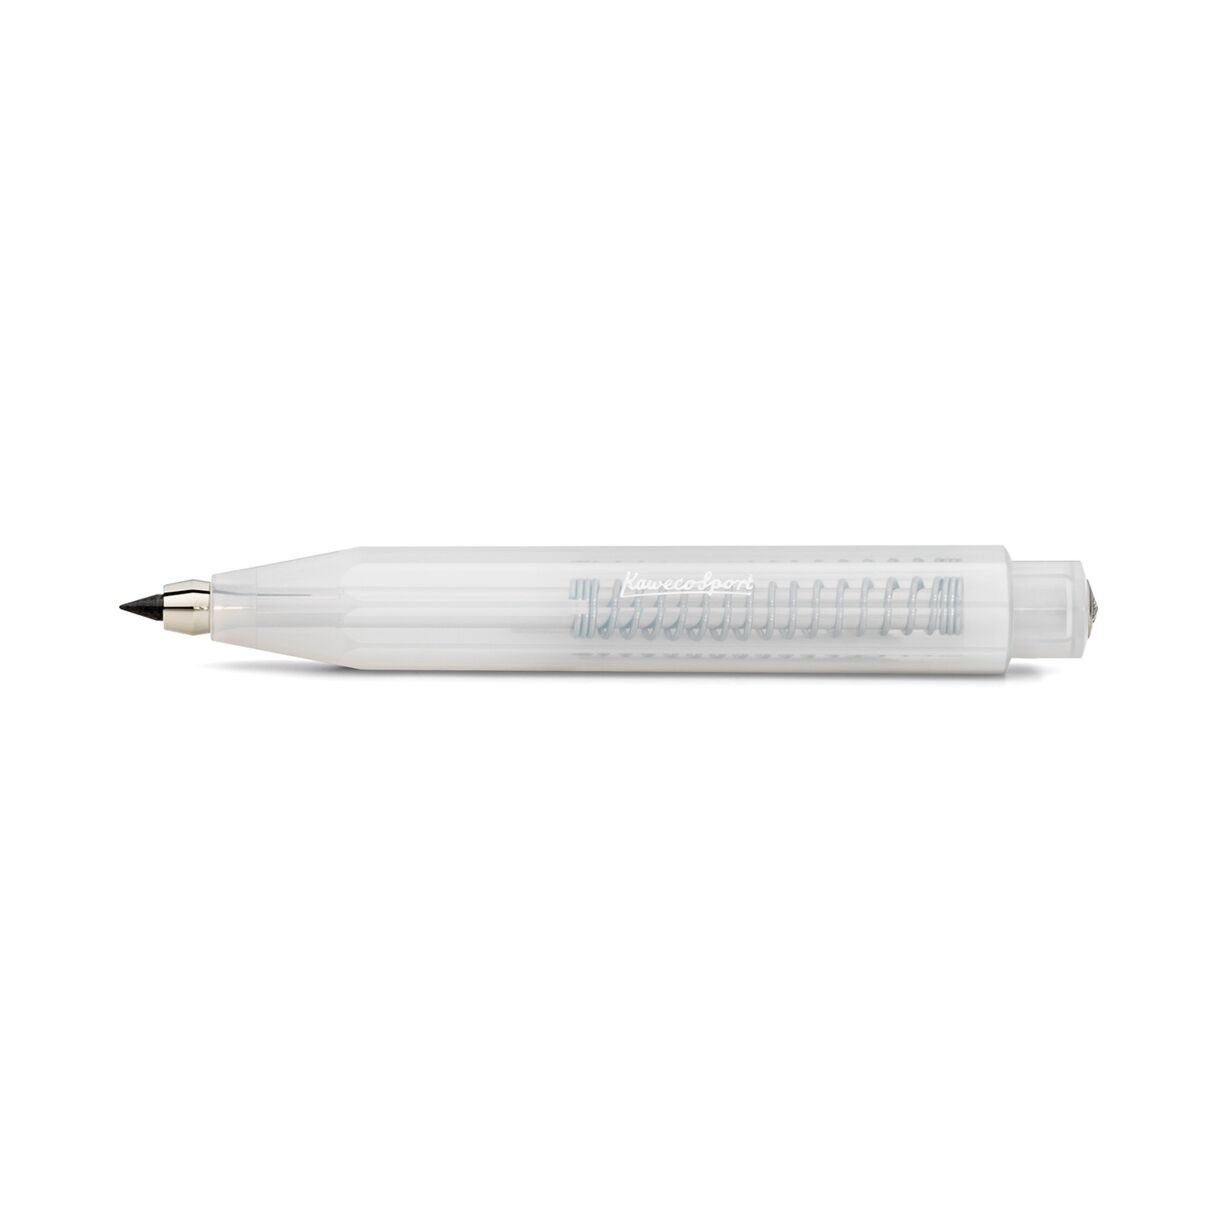 Sport Frosted mechanical pencil 3.2mm coconut - Kaweco 